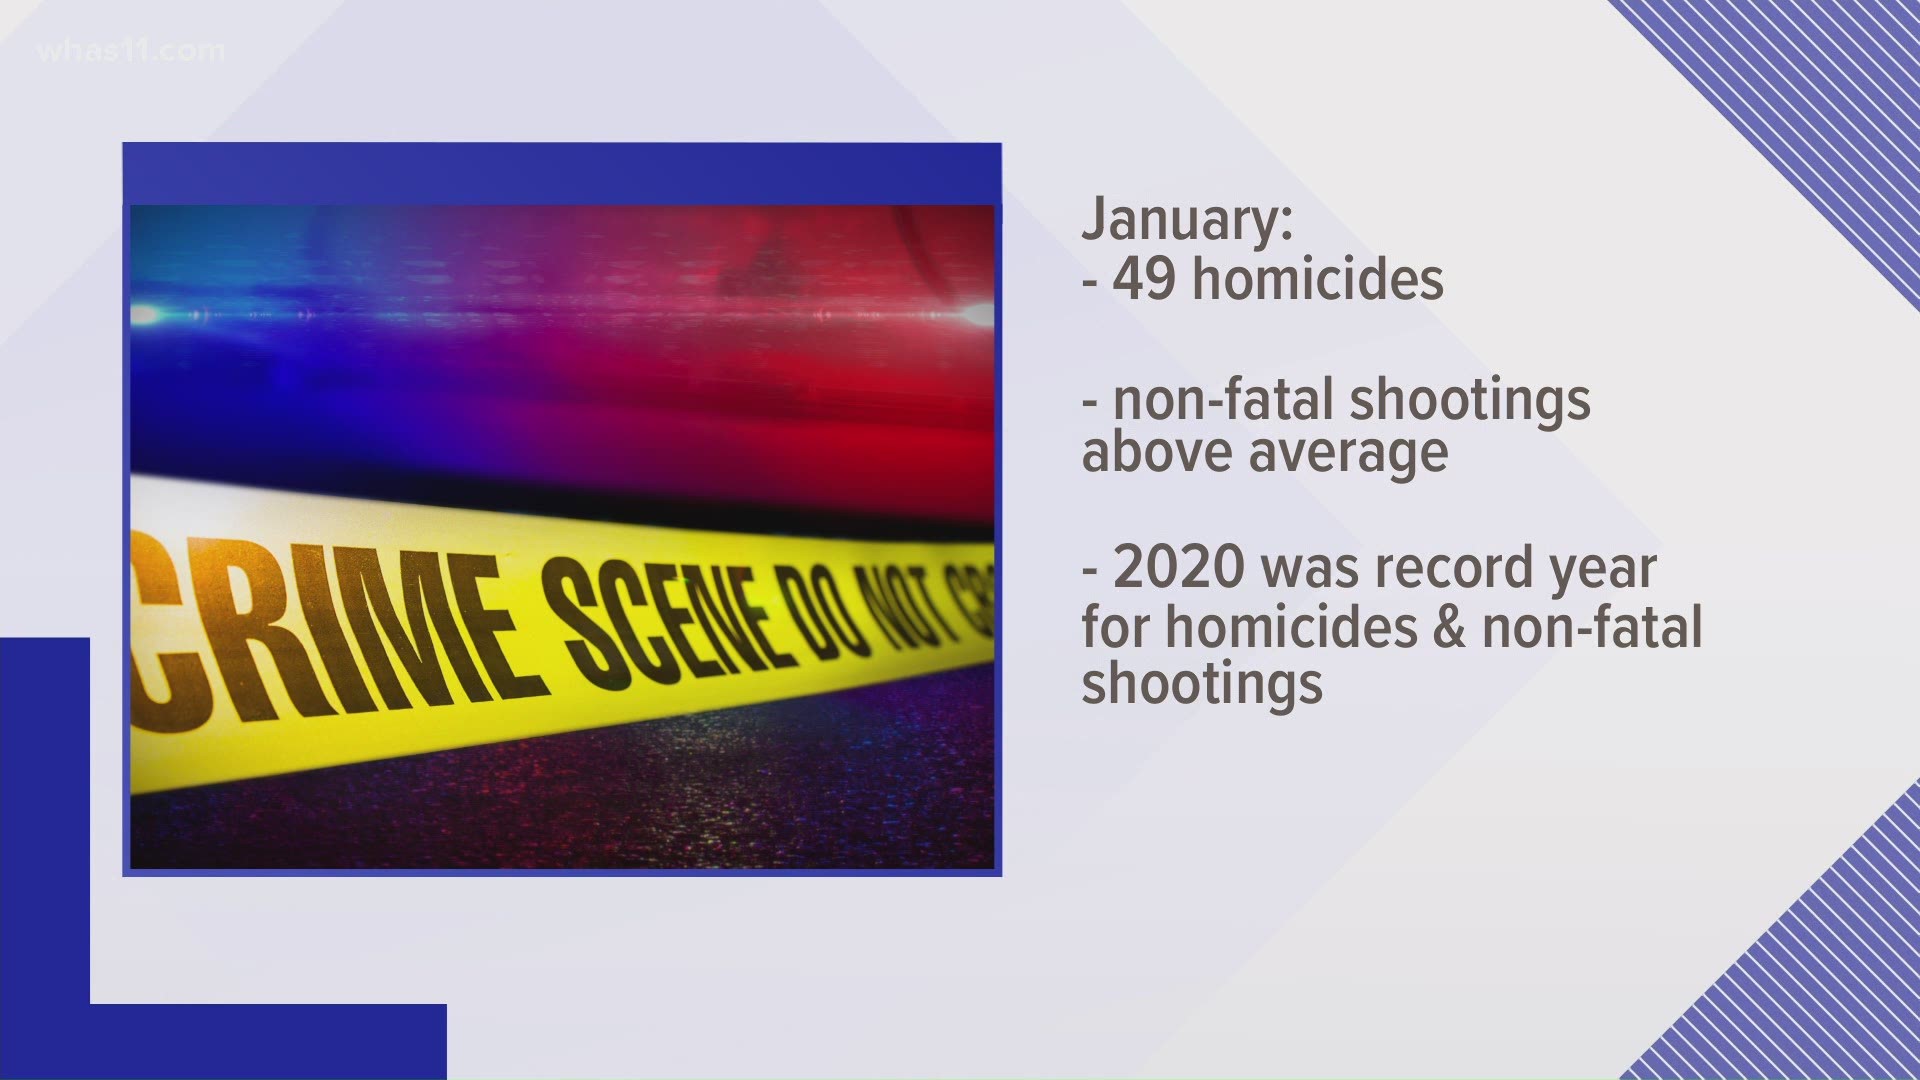 The city had 15 homicides, making it the deadliest January on record, according to Metro Police data.